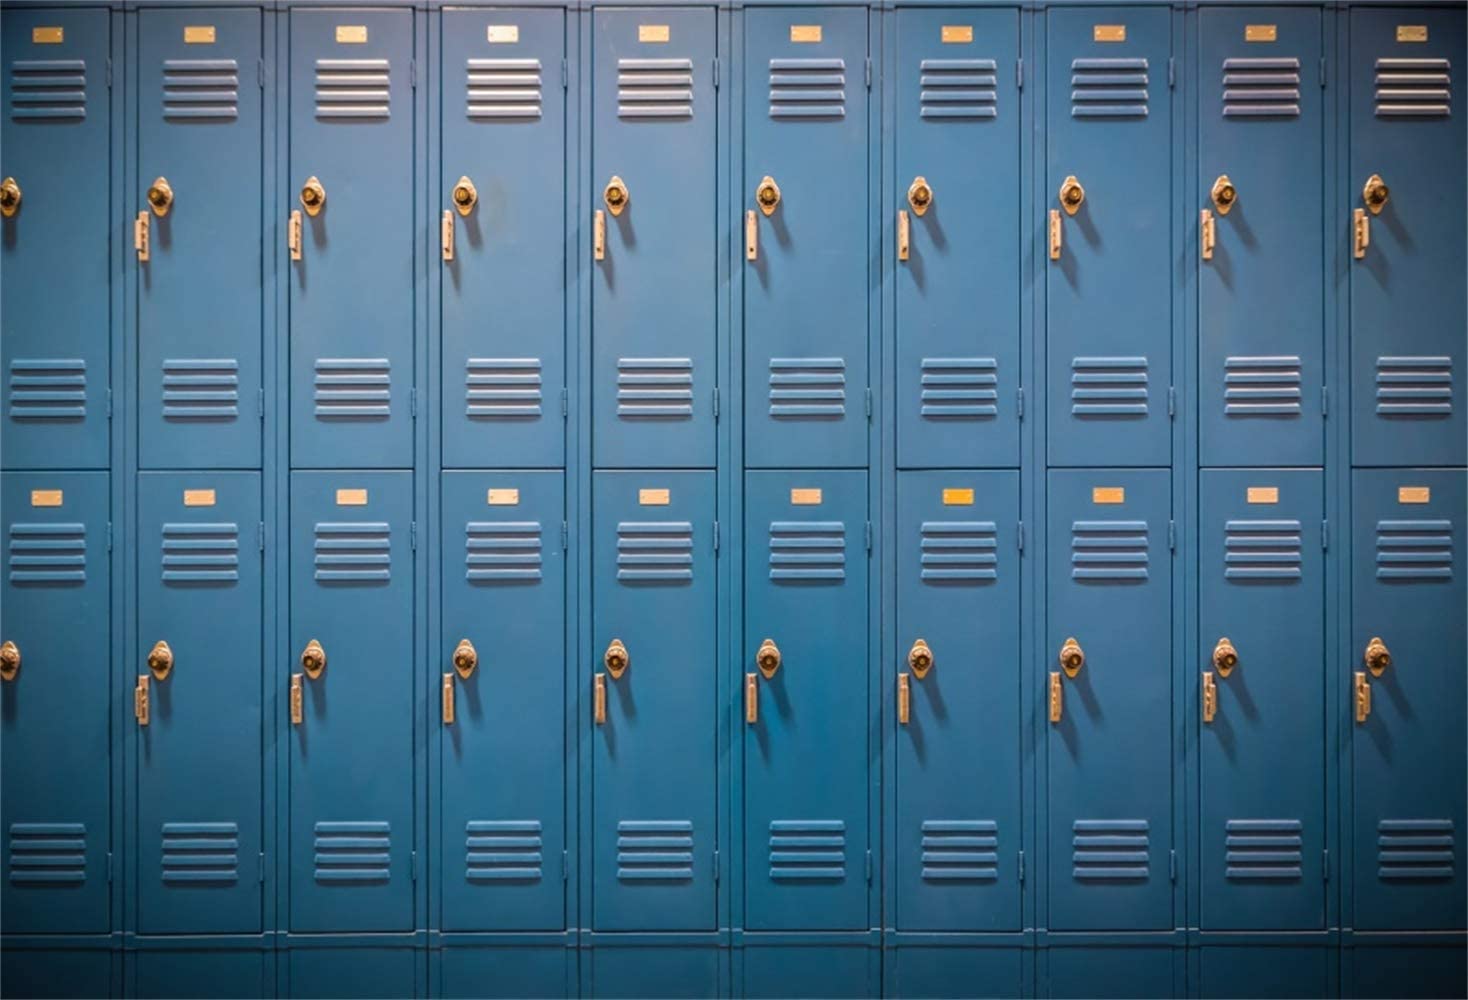 HD wallpaper lockers in a row indoors repetition safety storage  compartment  Wallpaper Flare